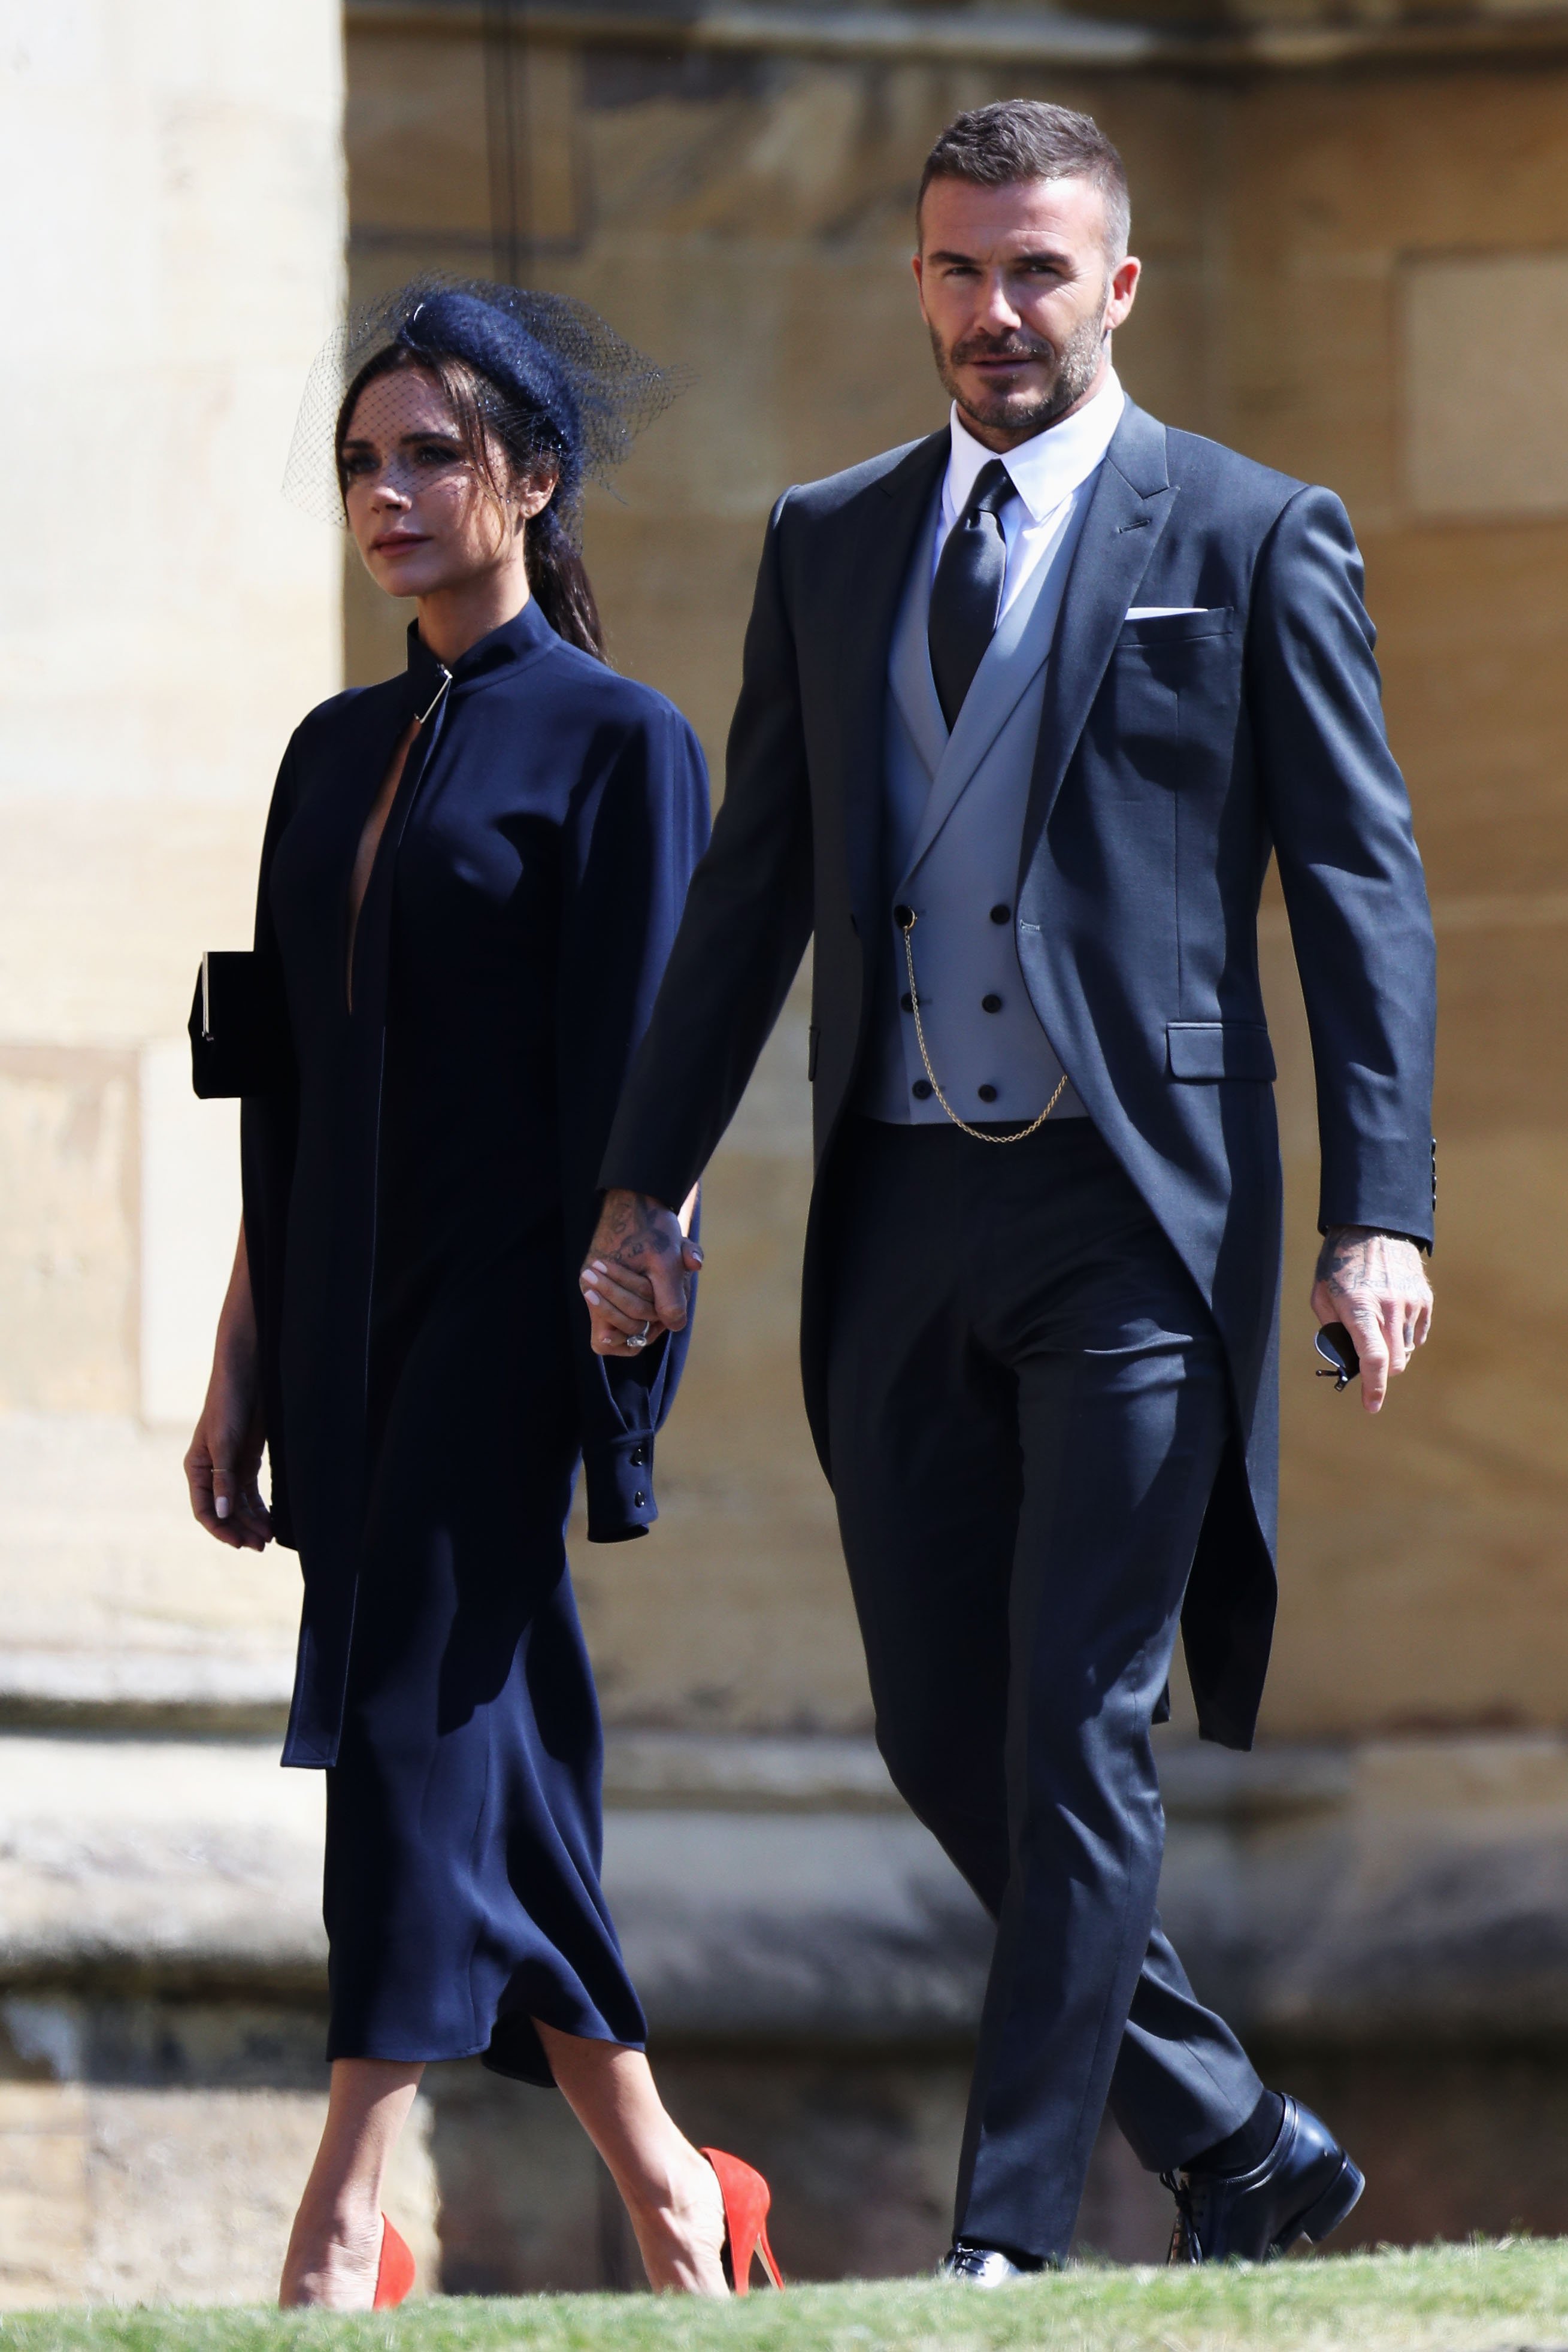 Victoria Beckham and David Beckham arrive at Prince Harry and Meghan Markle's wedding at St George's Chapel, Windsor Castle on May 19, 2018, in Windsor, England. | Source: Getty Images.